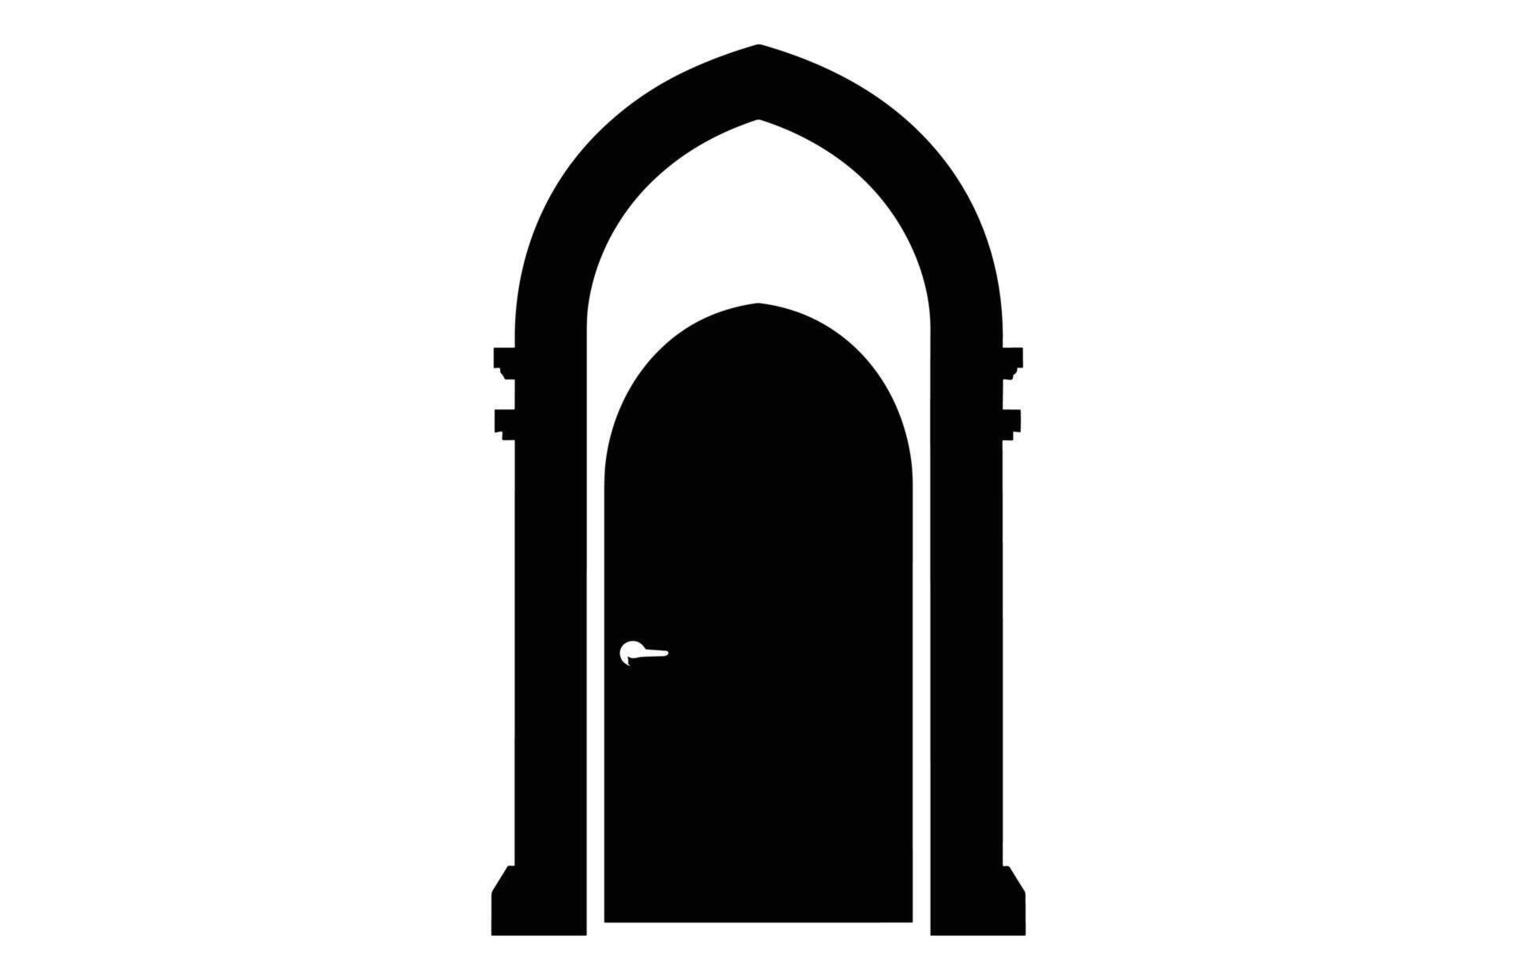 Medieval door silhouettes, Architectural type of arches shapes and forms silhouettes, vector